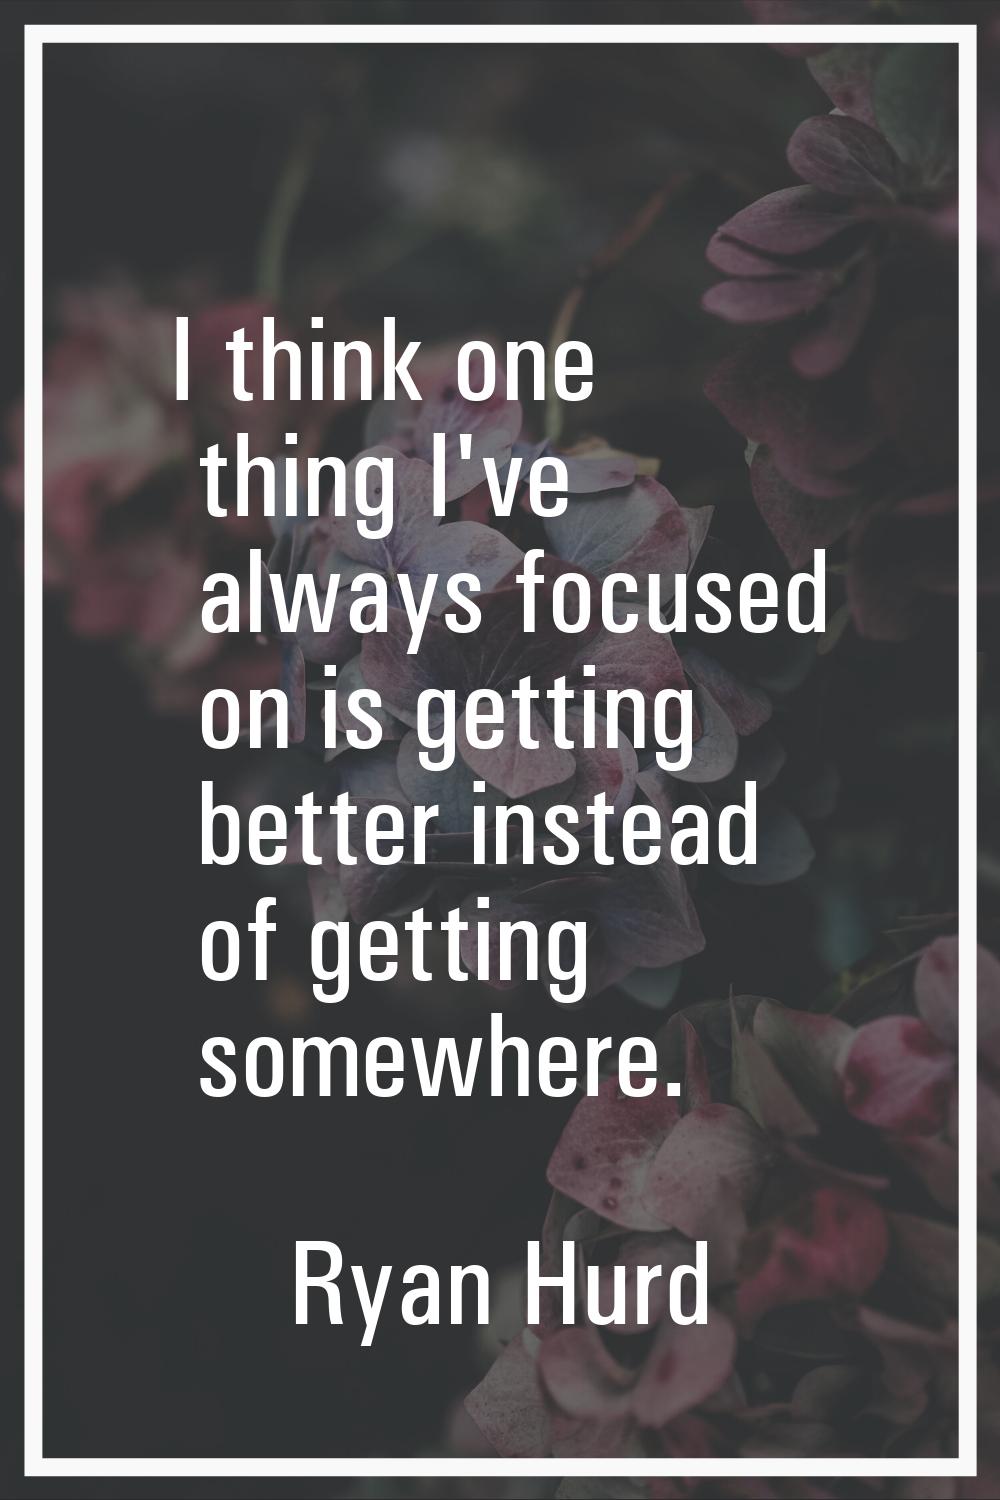 I think one thing I've always focused on is getting better instead of getting somewhere.